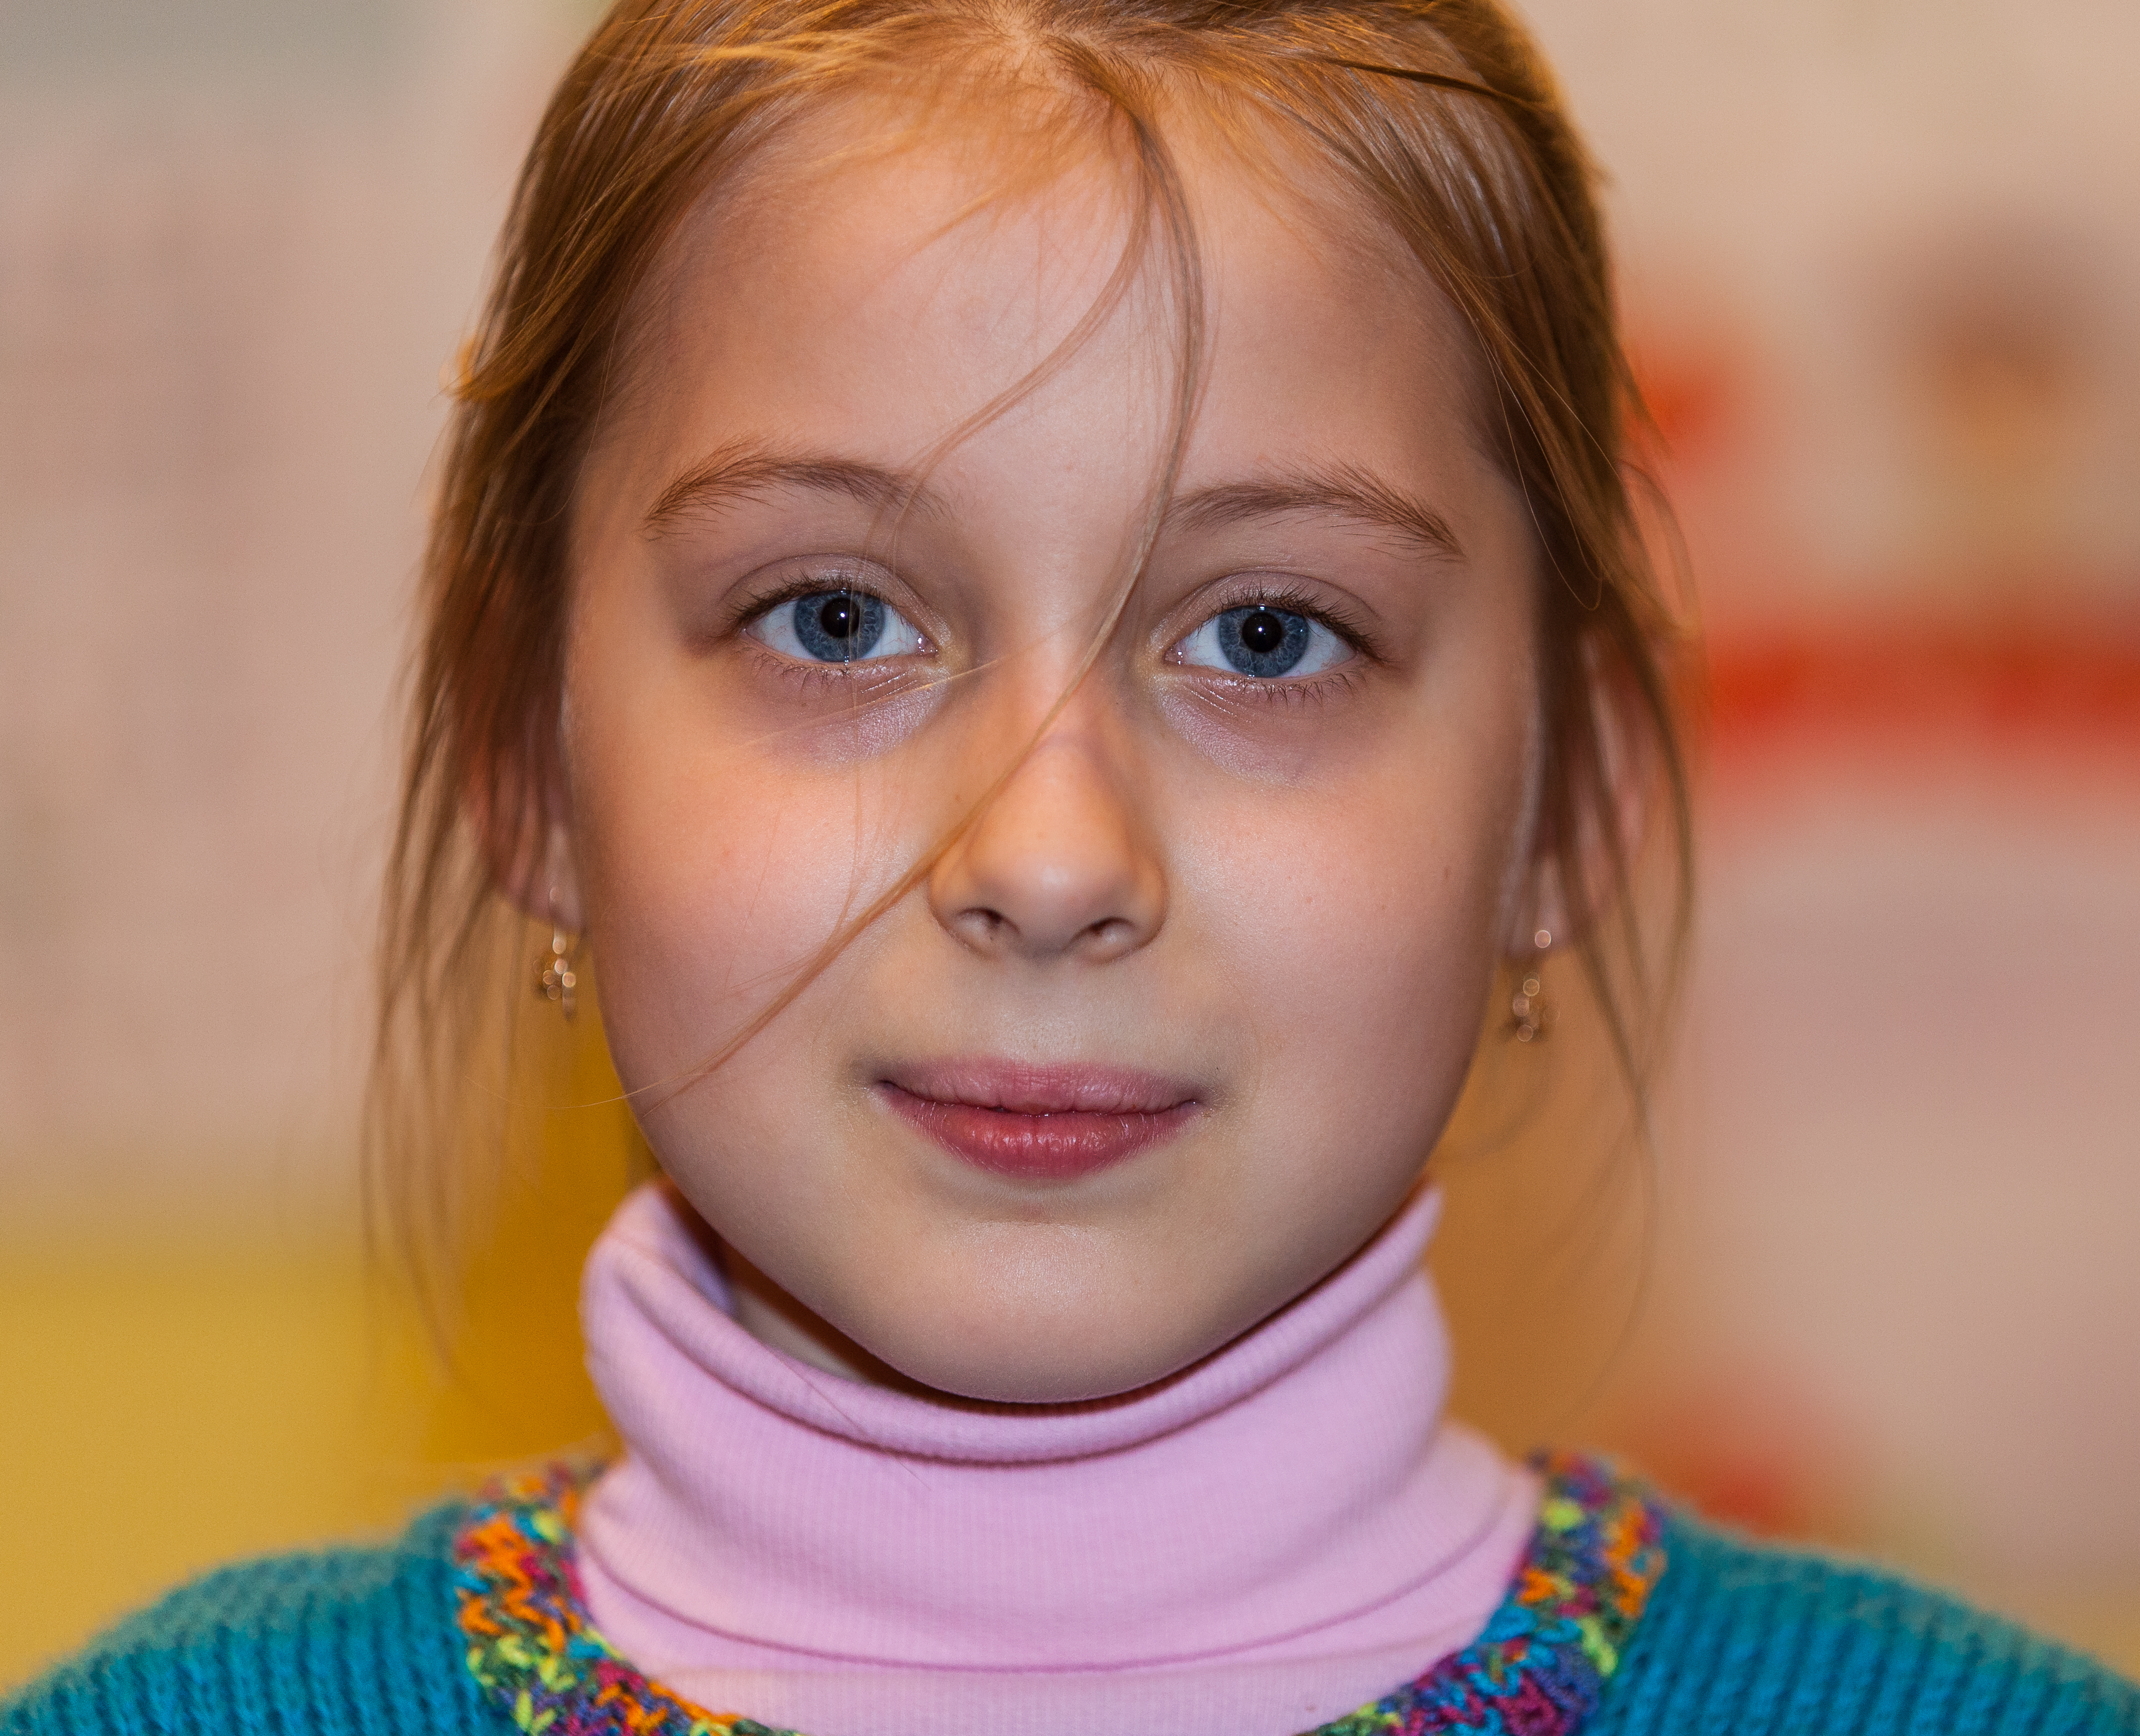 a young Catholic fair-haired pretty girl photographed in March 2014, image 4/6